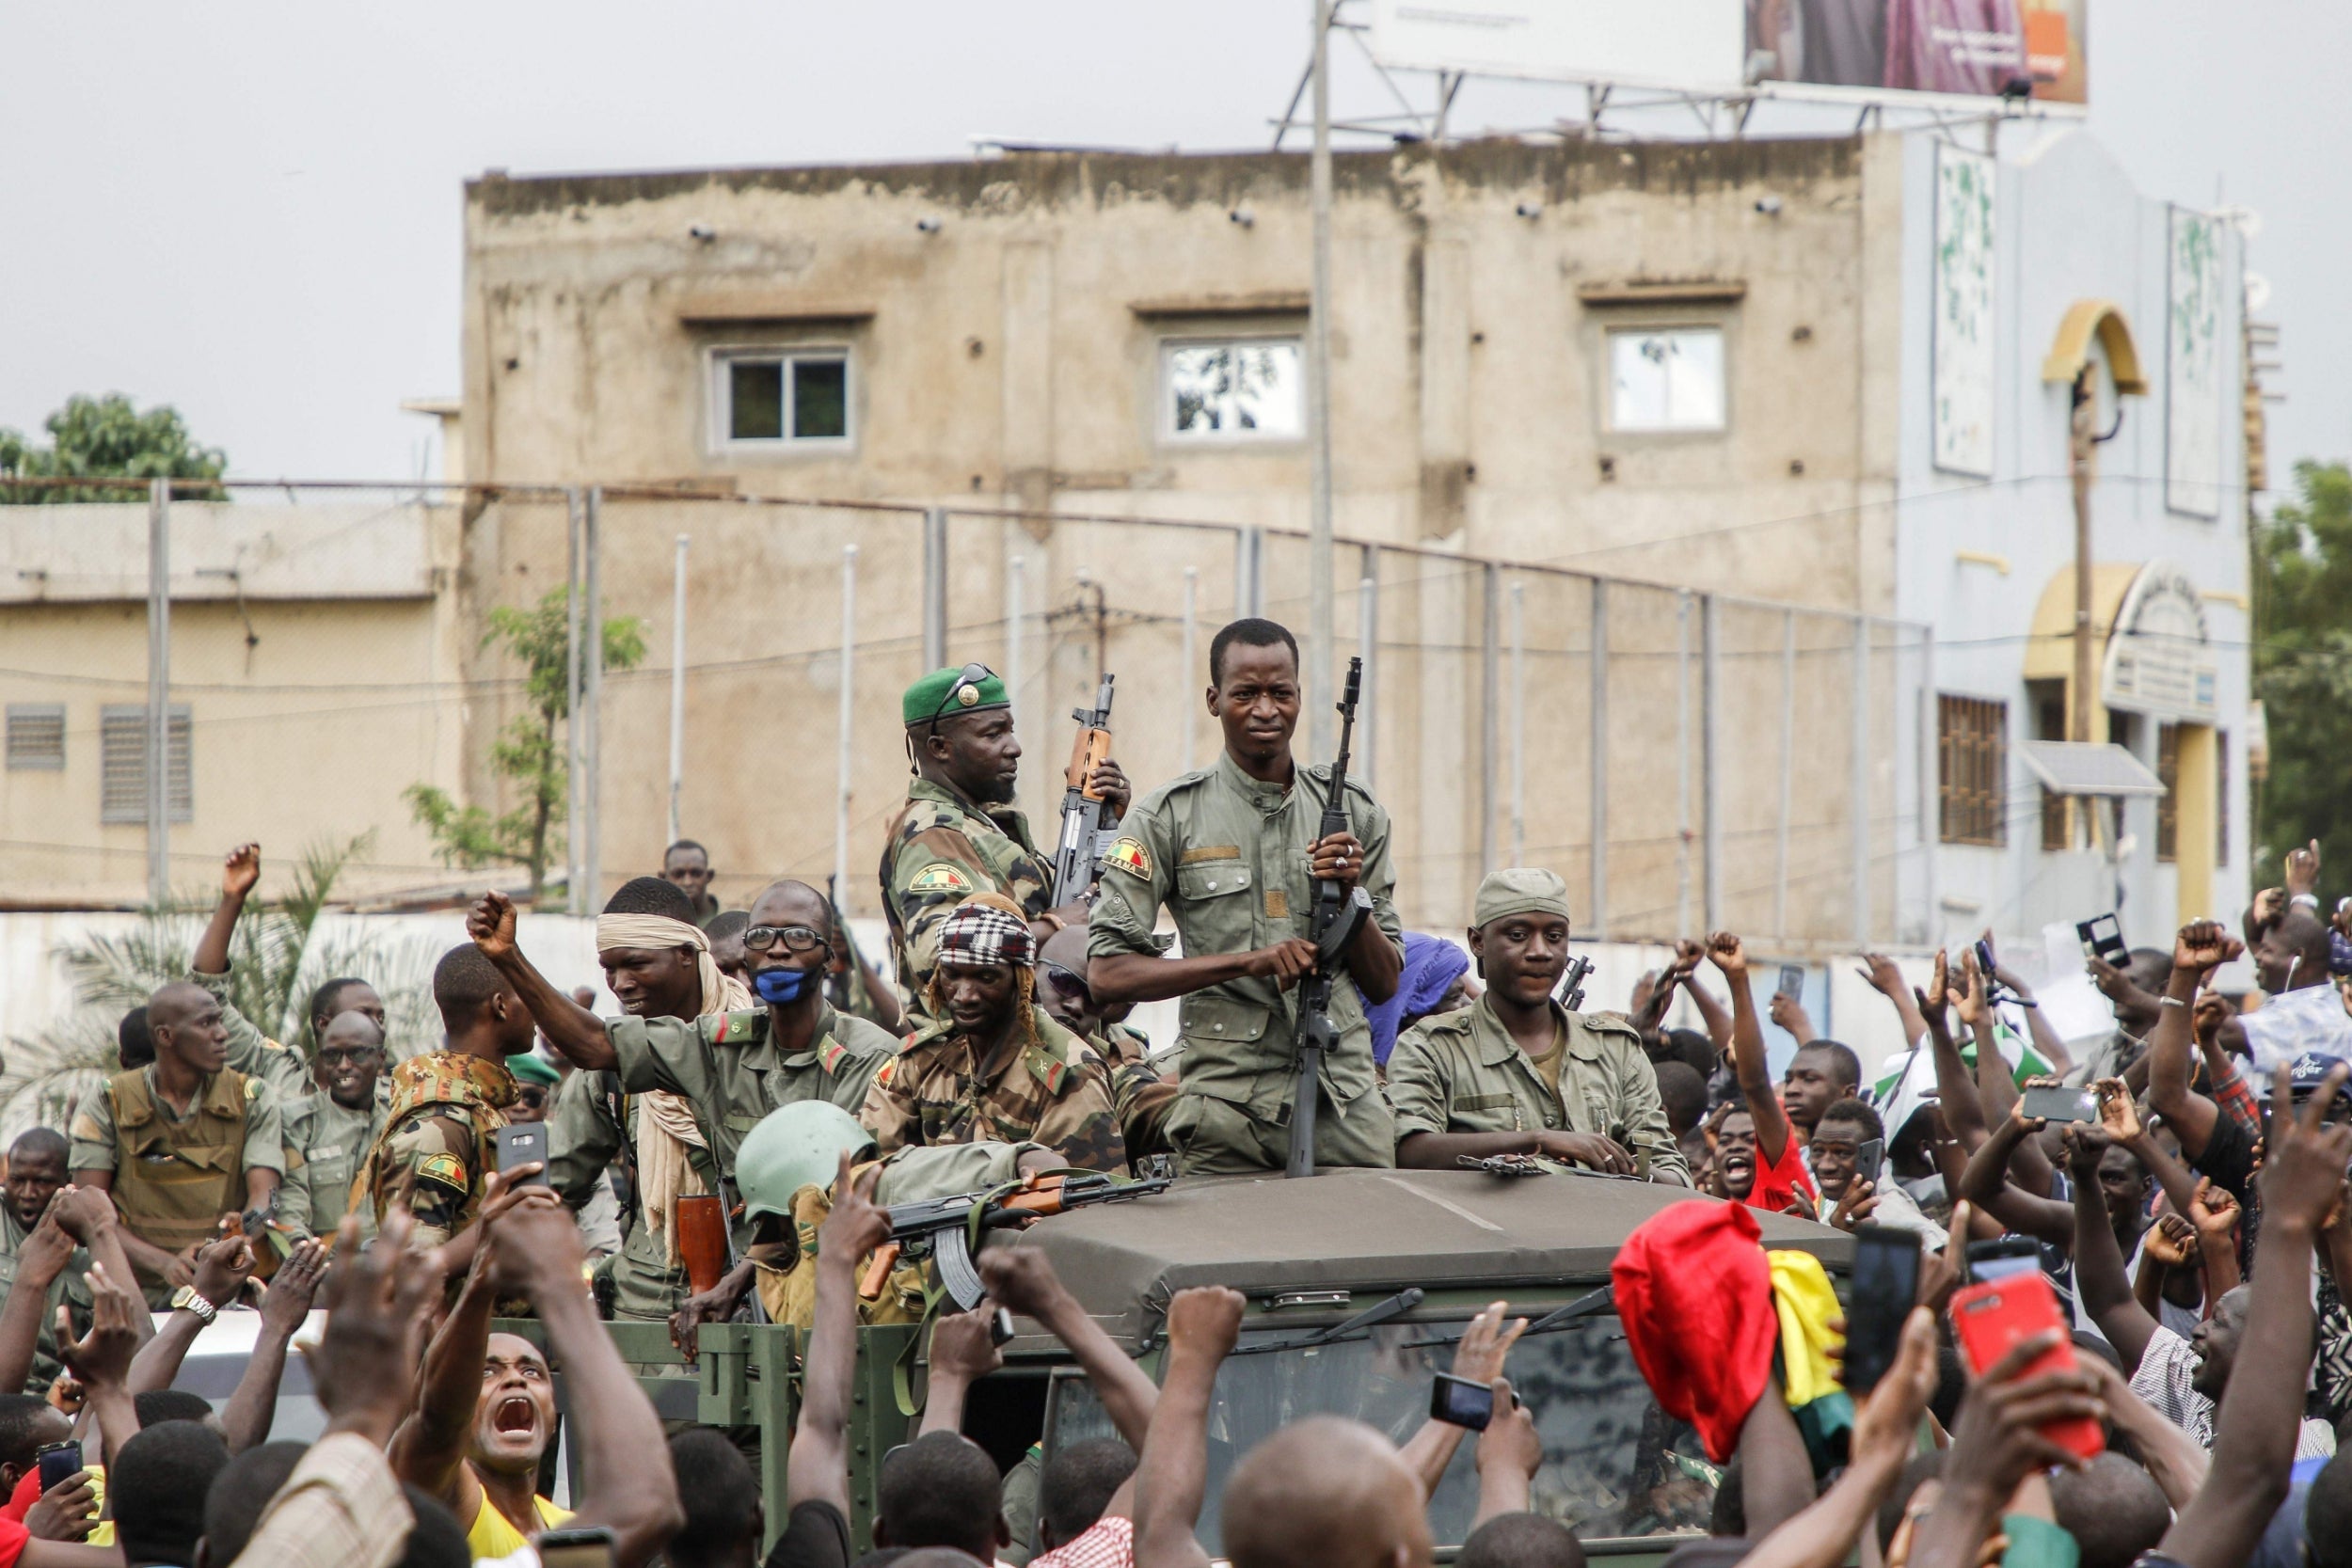 Malian armed forces are cheered on as they parade at Independence Square in Bamako after rebel troops seized the president (AFP/Getty)